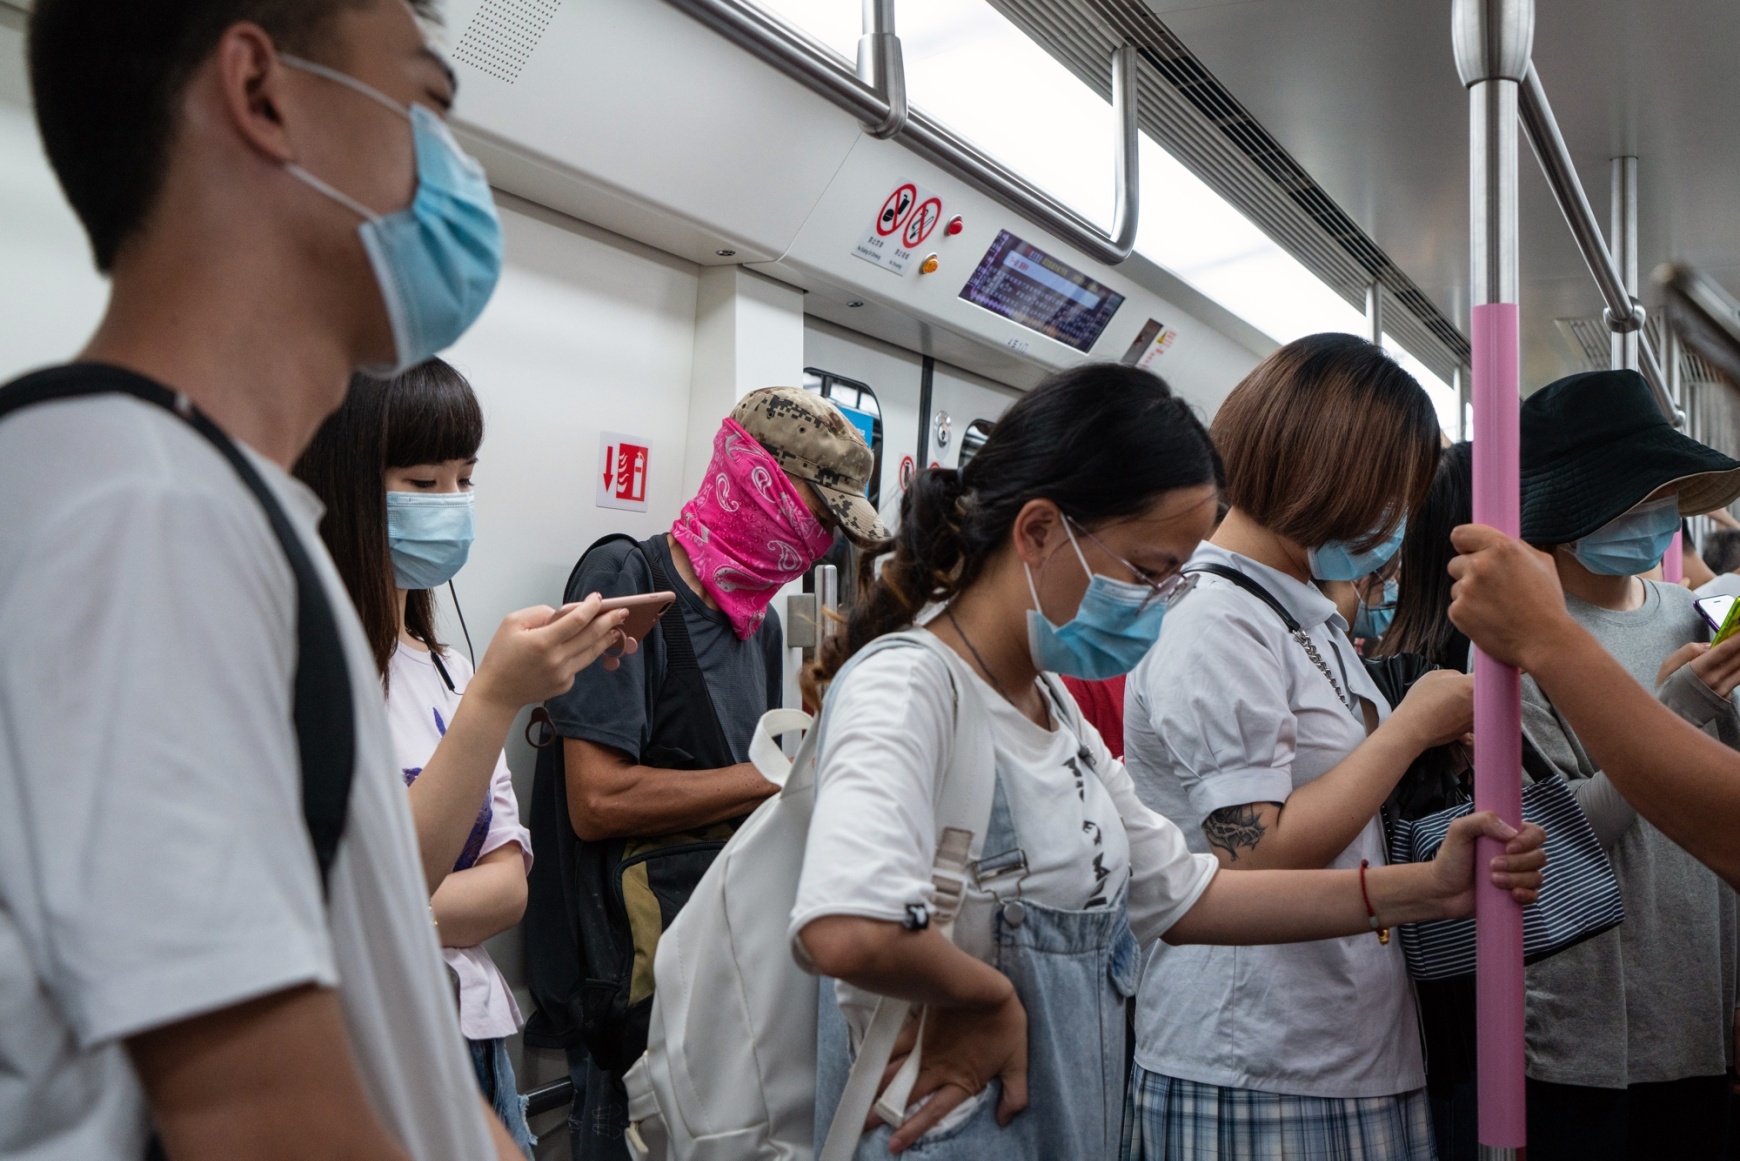 Commuters wear masks and face coverings on a busy subway train in Wuhan.